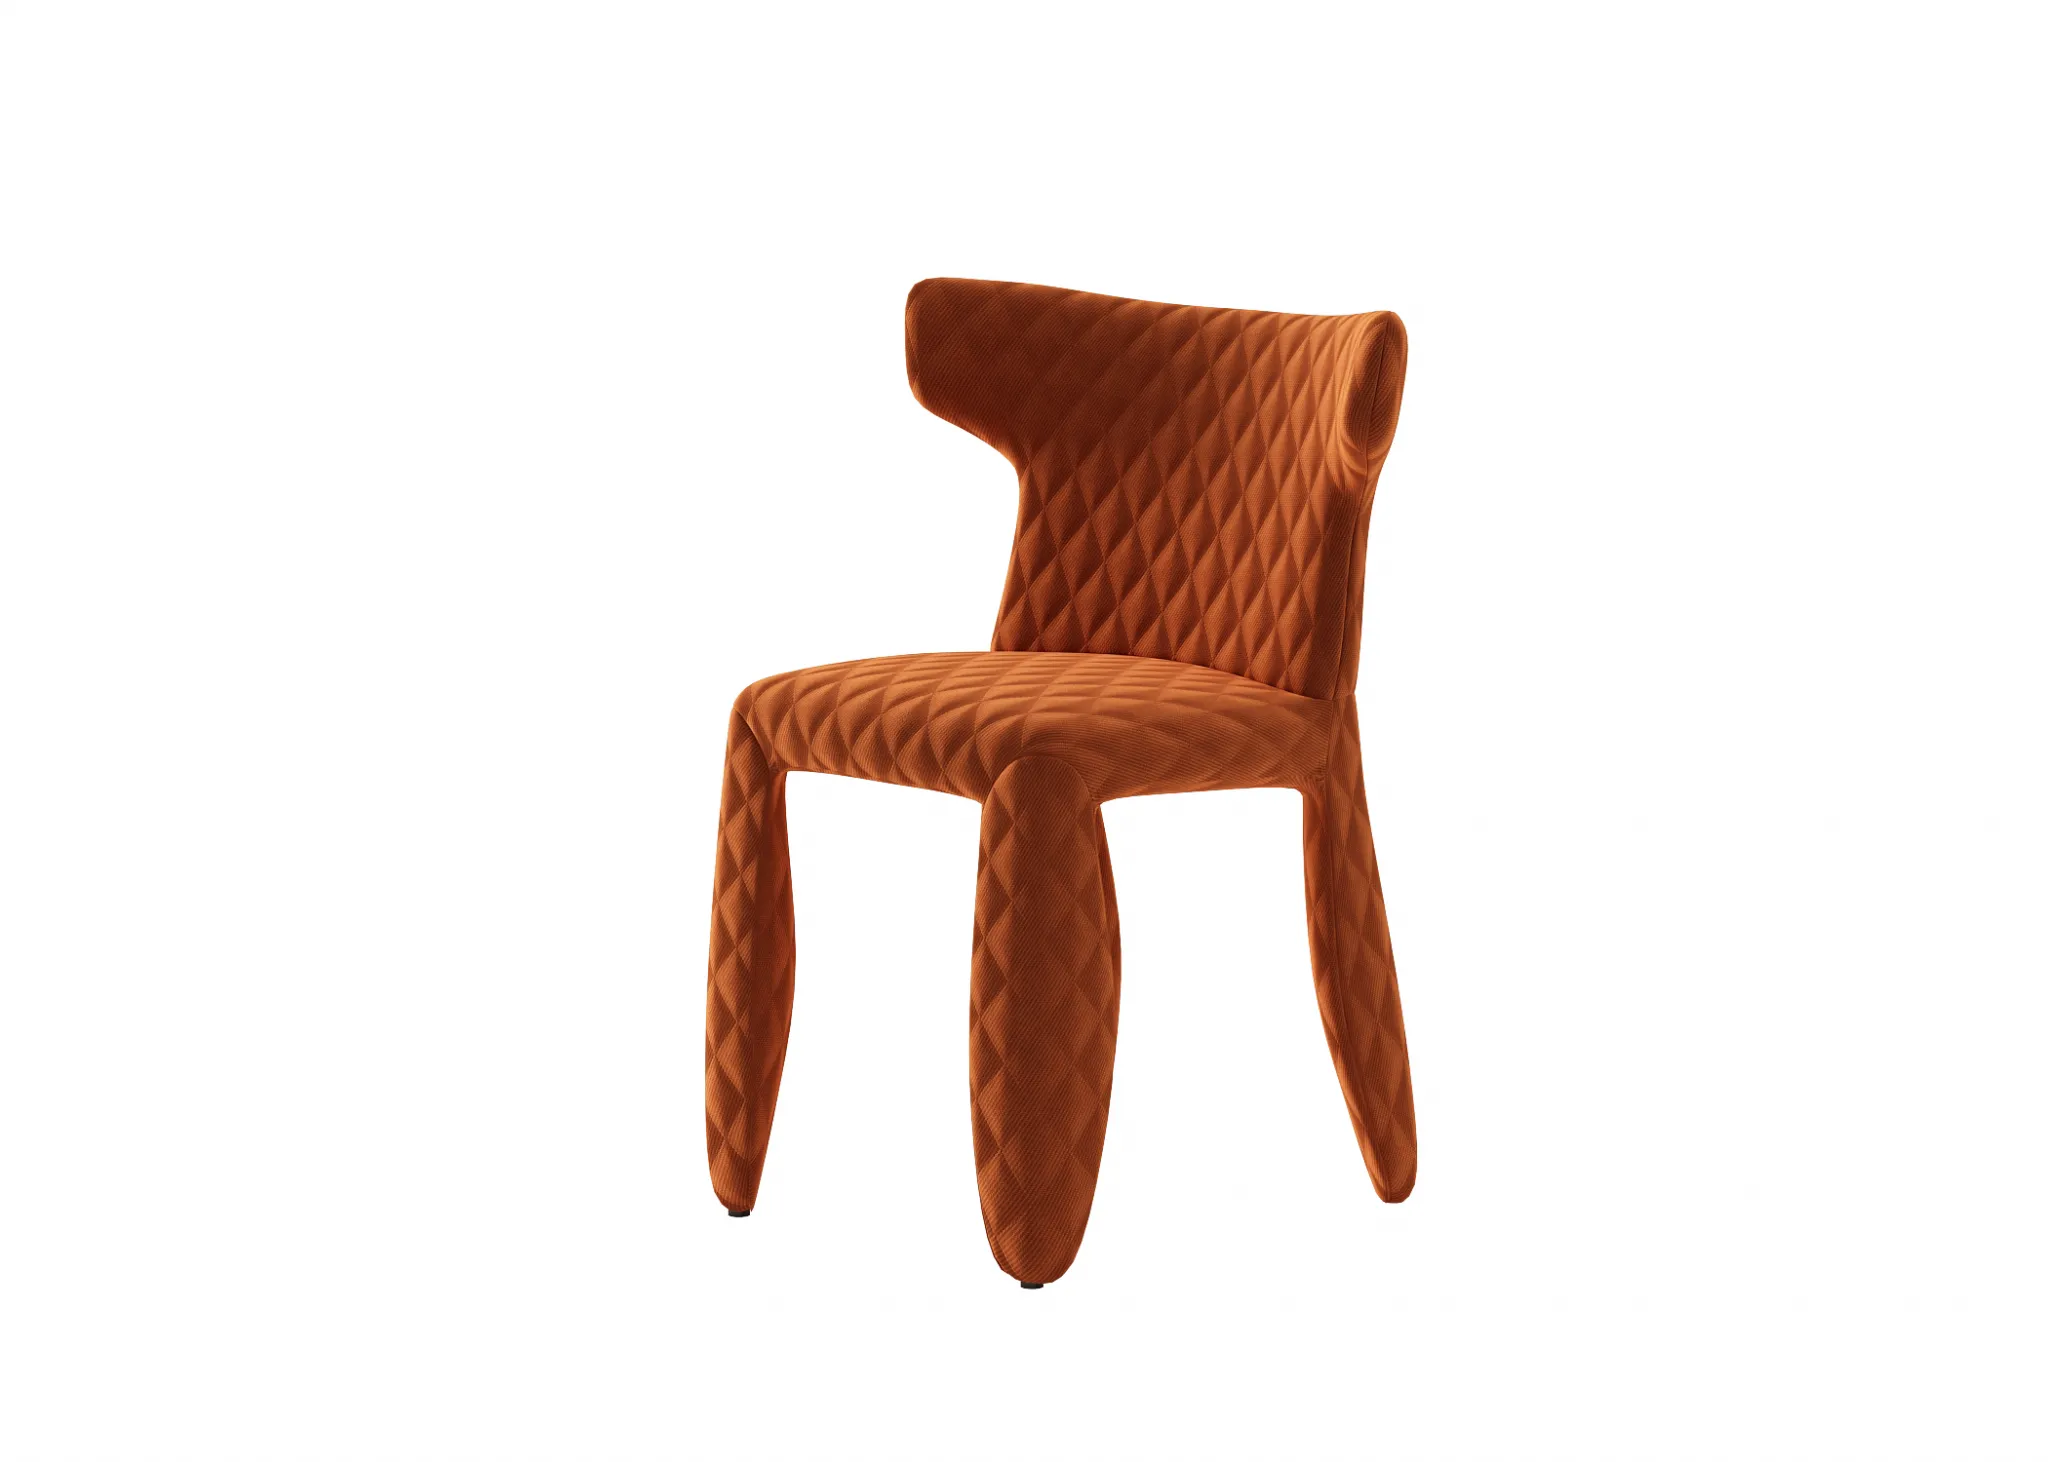 FURNITURE 3D MODELS – CHAIRS – 0343